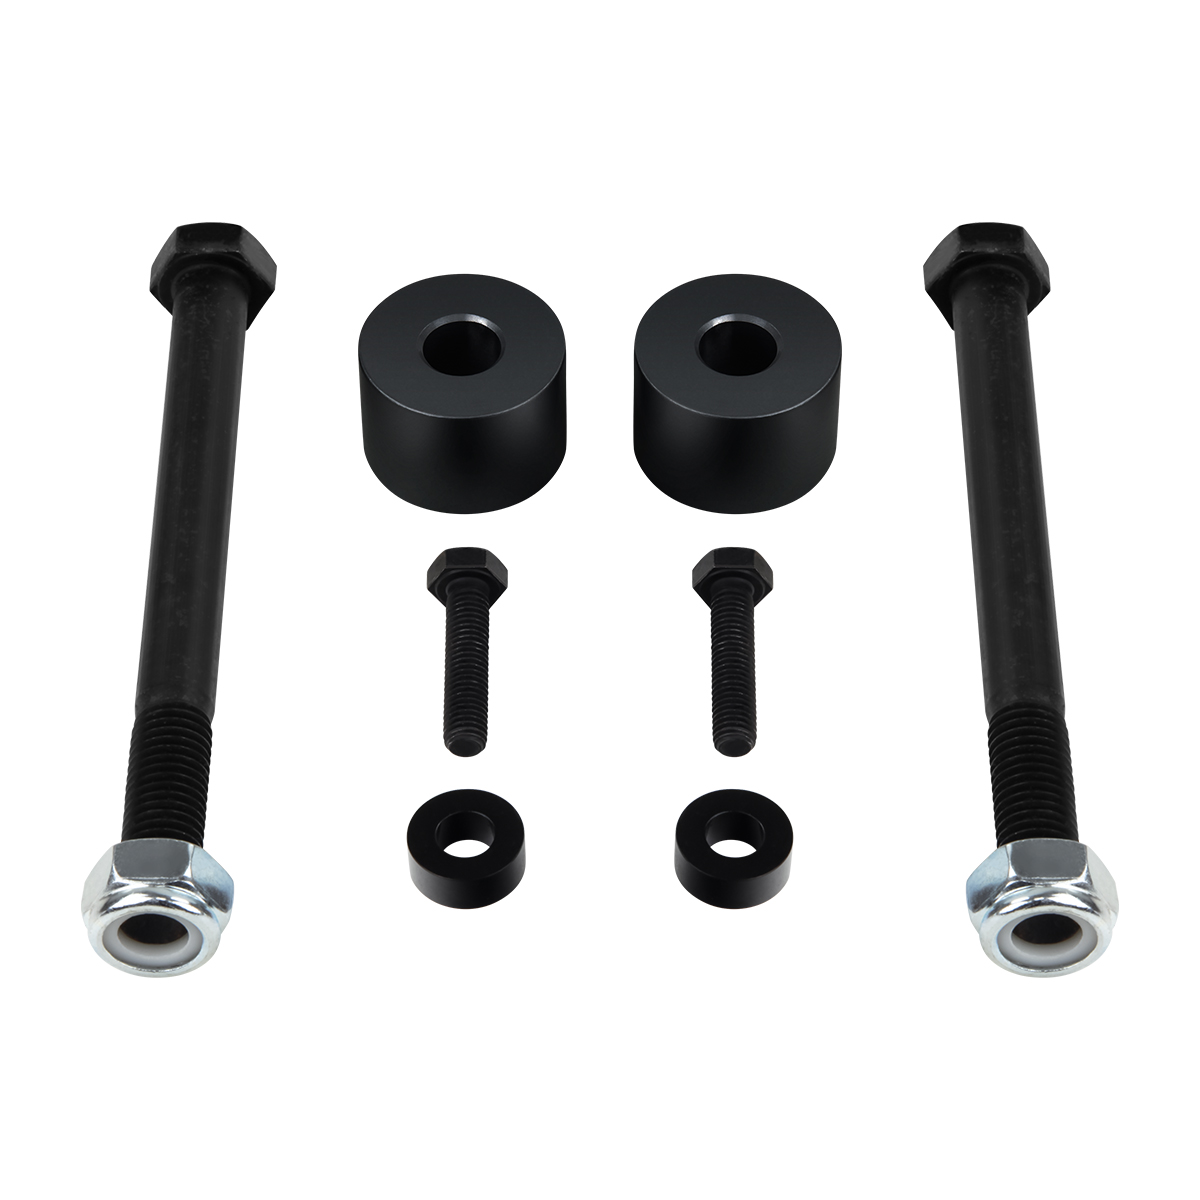 Differential Drop Spacers Alignment Kit PRO For 2005-2015 Toyota FJ Cruiser 4WD